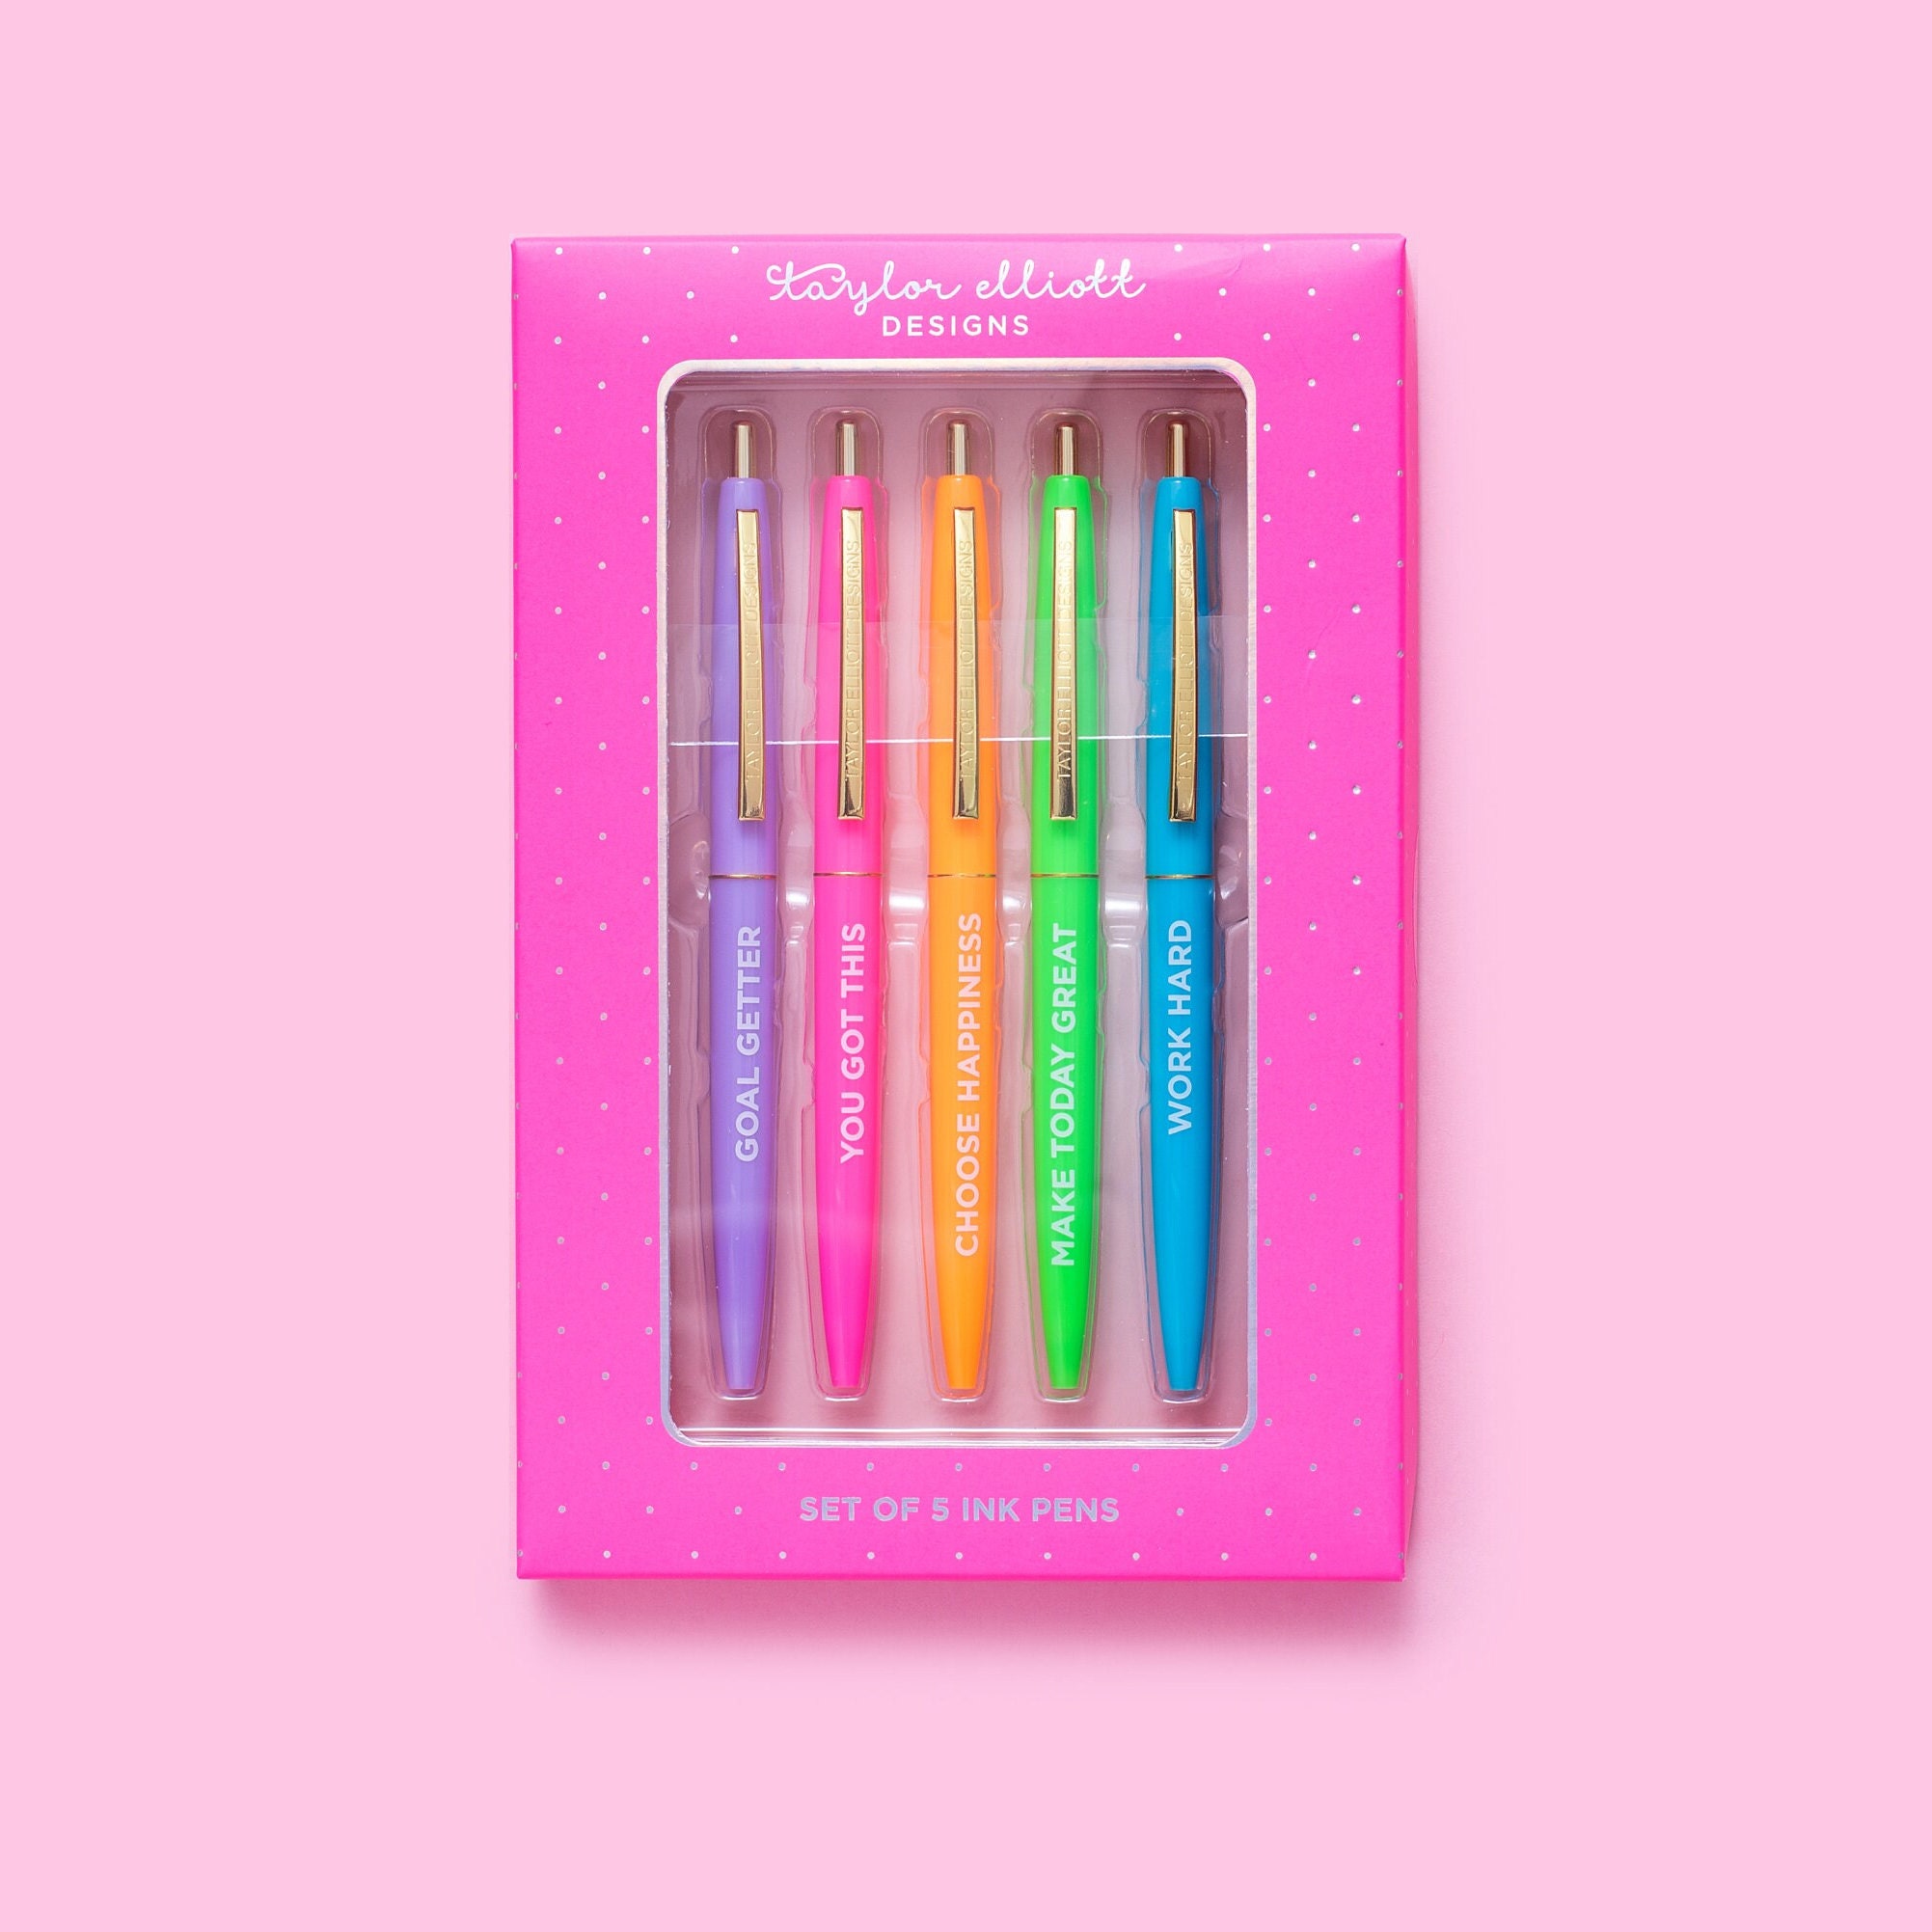 Colorful Gel Pen Set for Girls With Sayings, Journal Pen Gift Set, Cute Pens,  0.5 Fine Point, Christian Girl Gift, Teen Birthday, for Her 